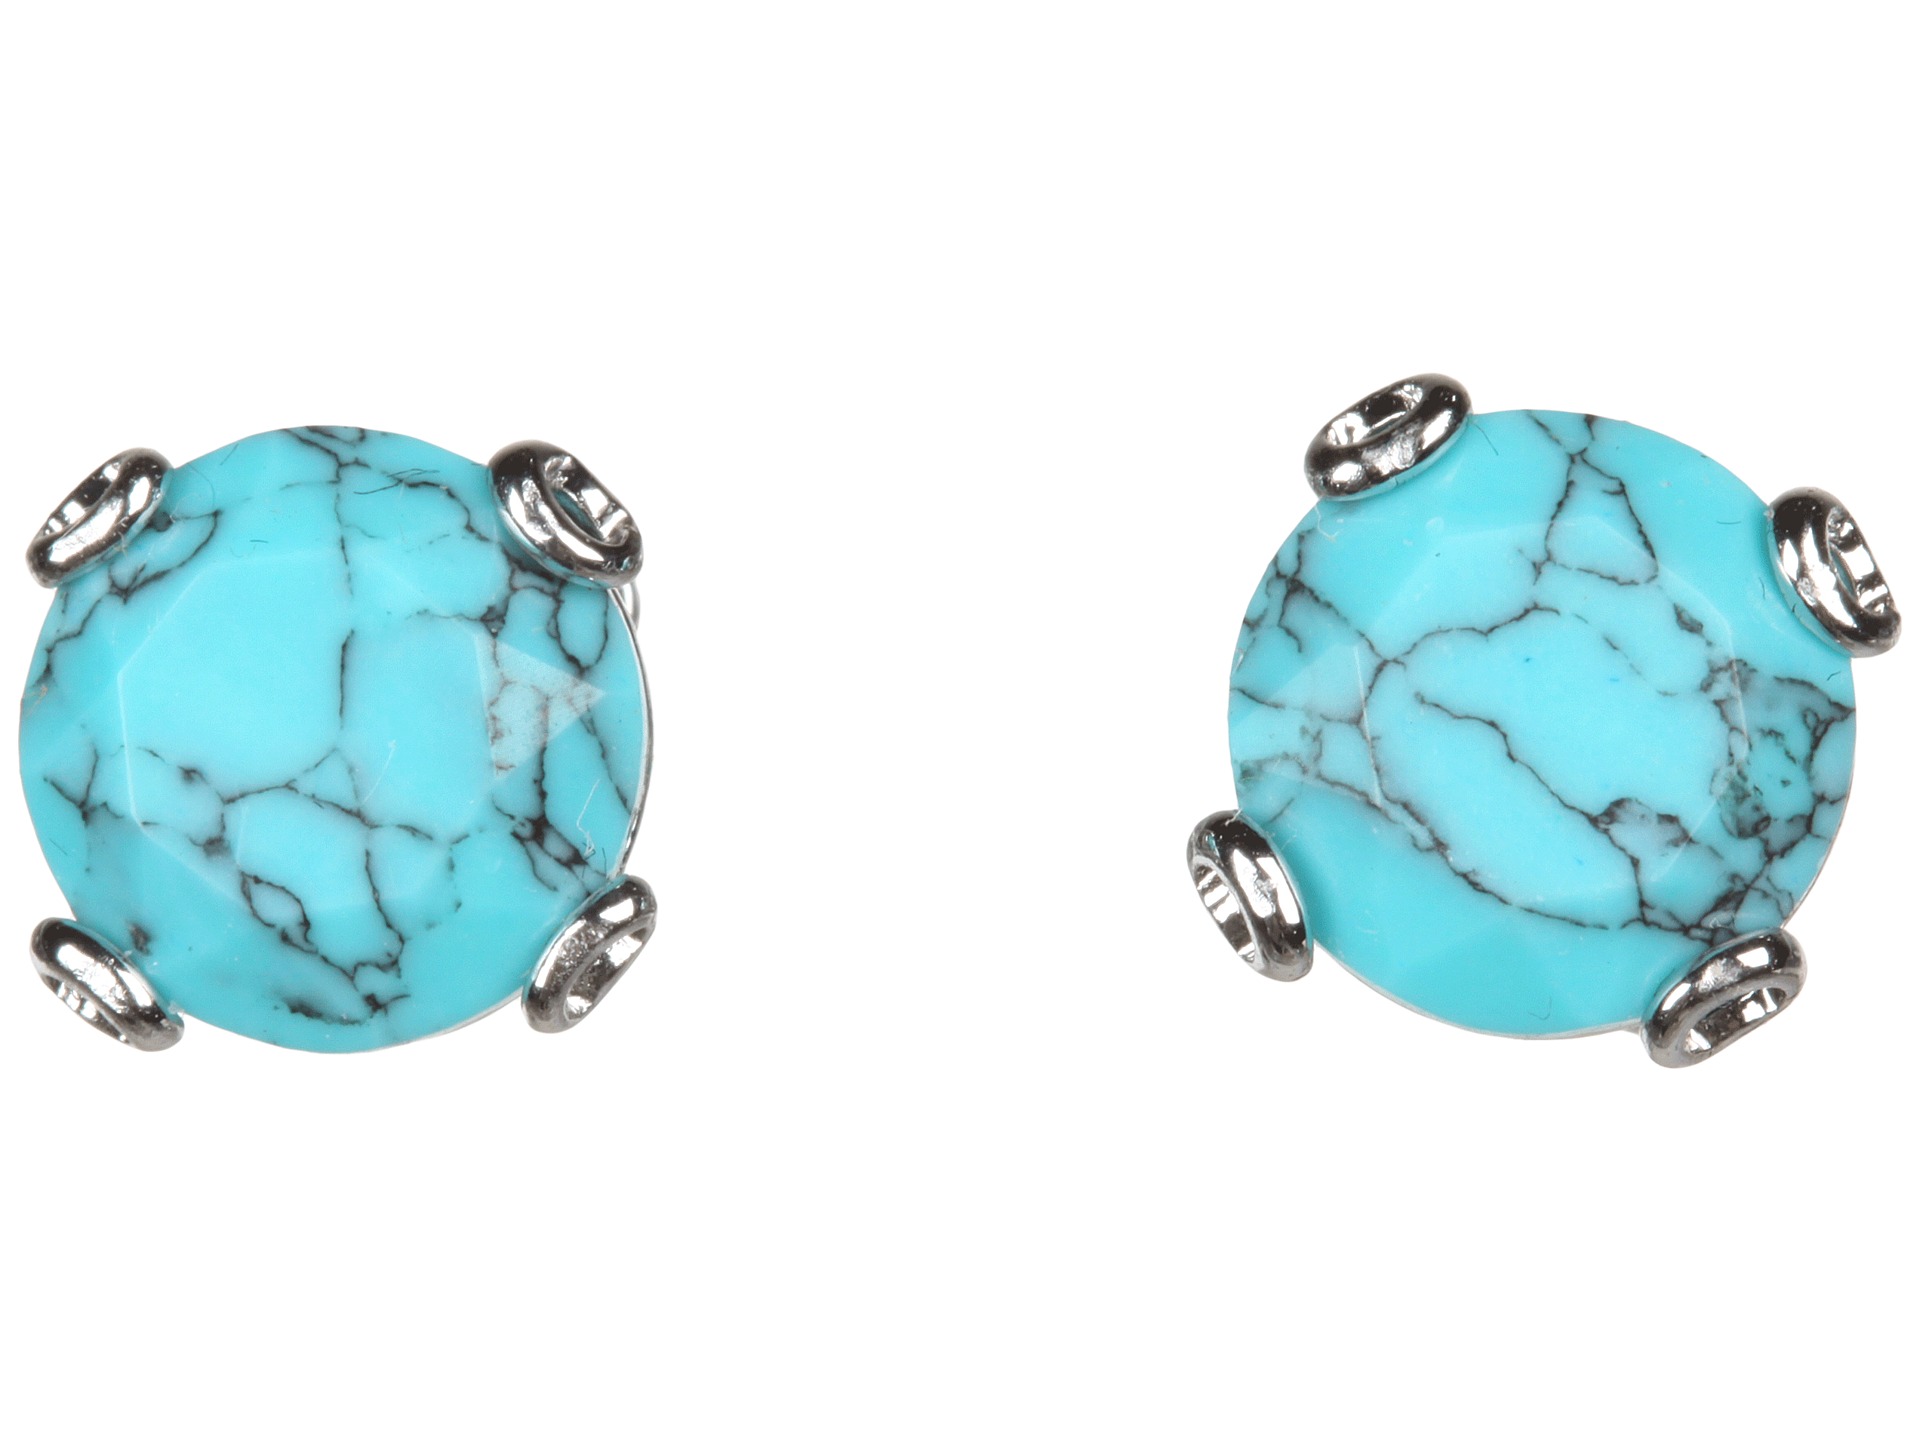 Fossil Turquoise Stud Earrings Turquoise Silver | Shipped Free at Zappos